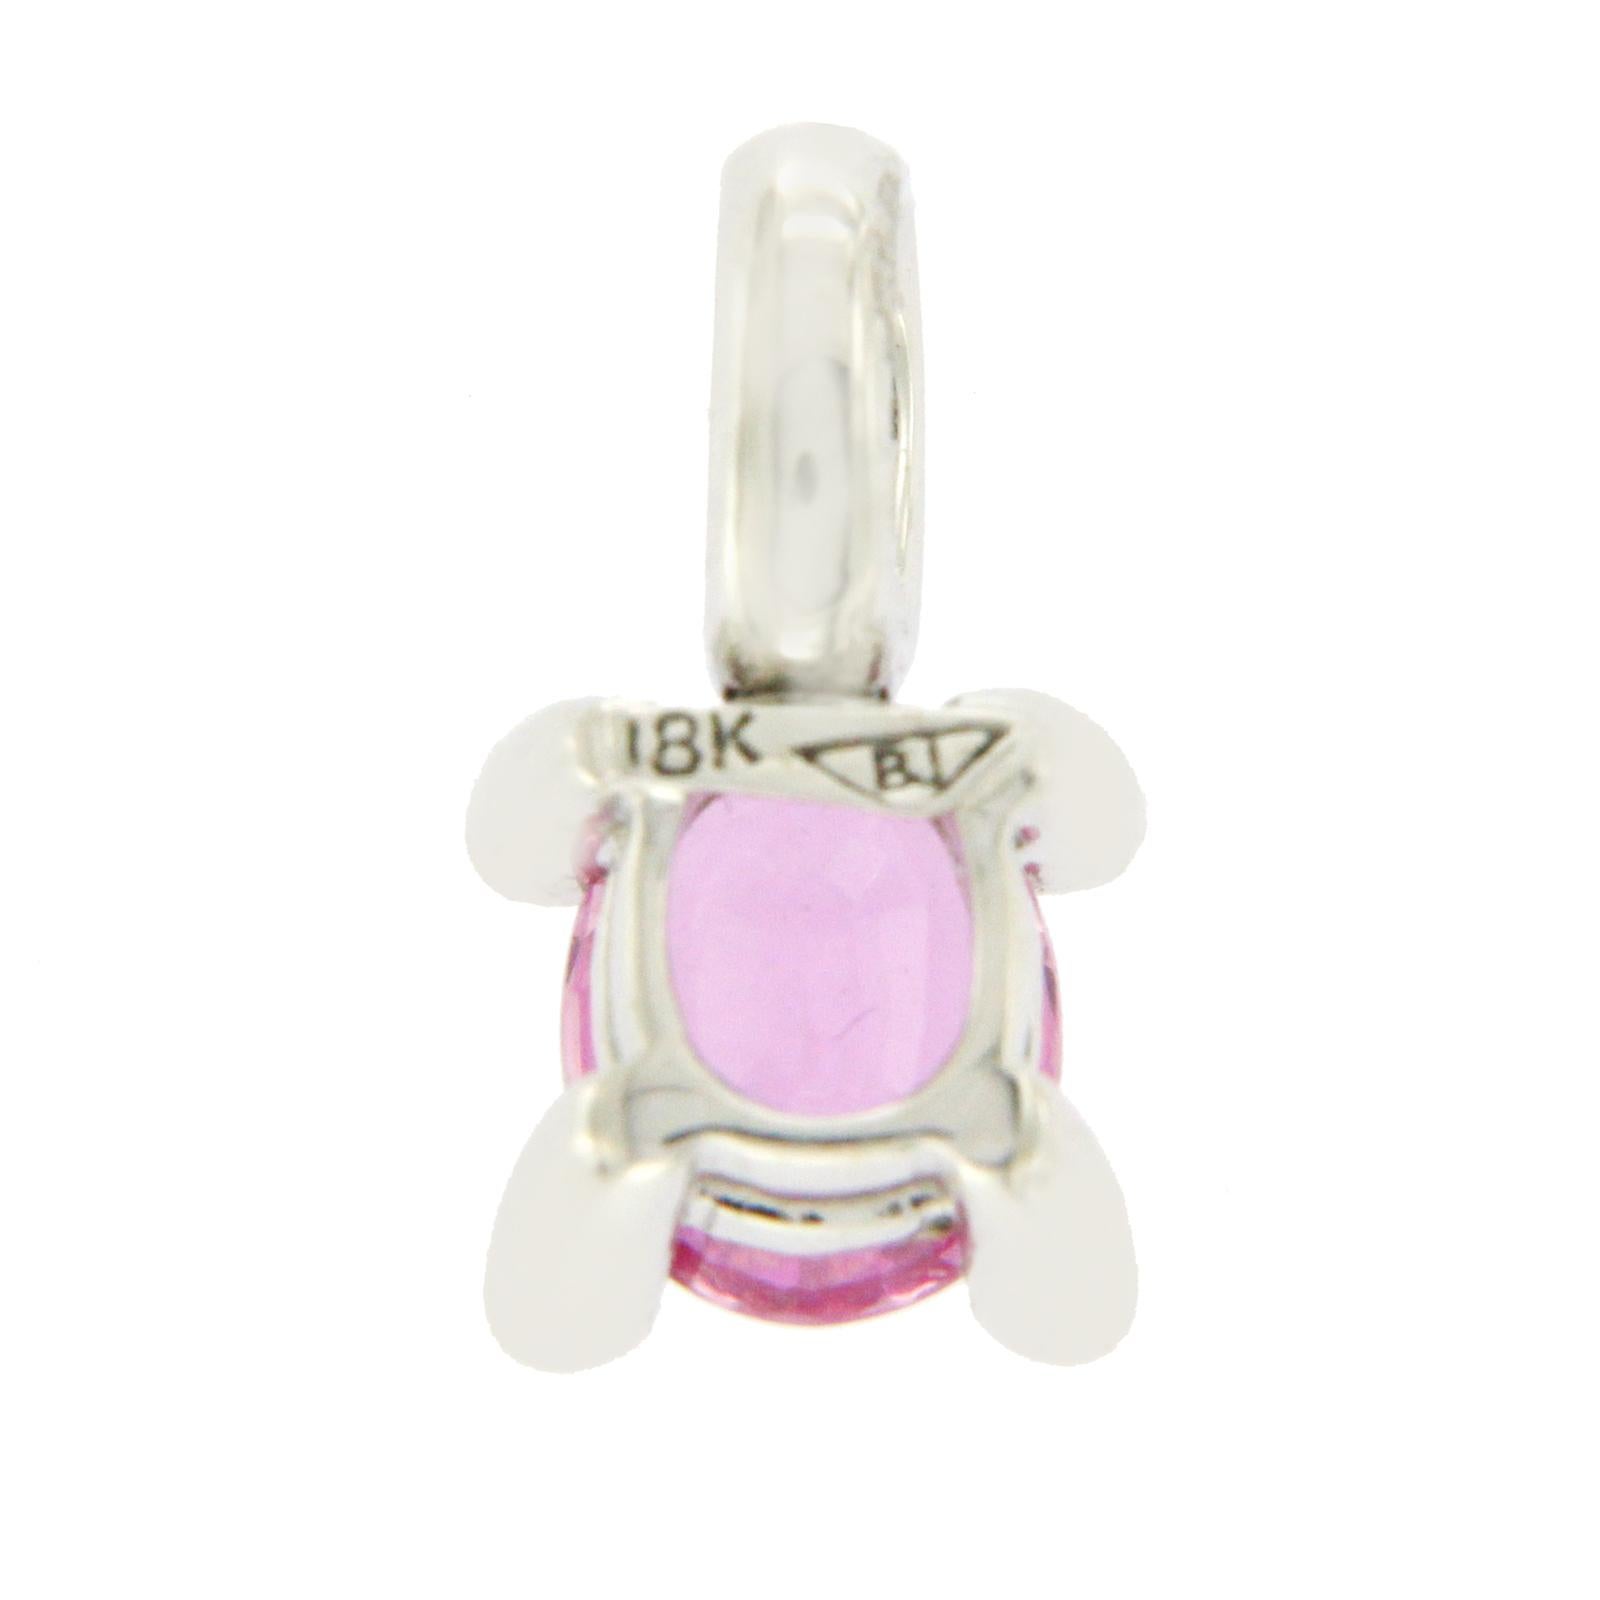 Type: Pendant
Height: 13 mm
Width: 7 mm
Metal: White Gold
Metal Purity: 18K
Stone Type:0.98 CT Natural Pink Sapphire and 0.06 CT G VS2 Diamonds
Hallmarks: 750
Total Weight: 1.5 Grams
Condition: New
Stock Number: BL17
Estimated Price:$2200